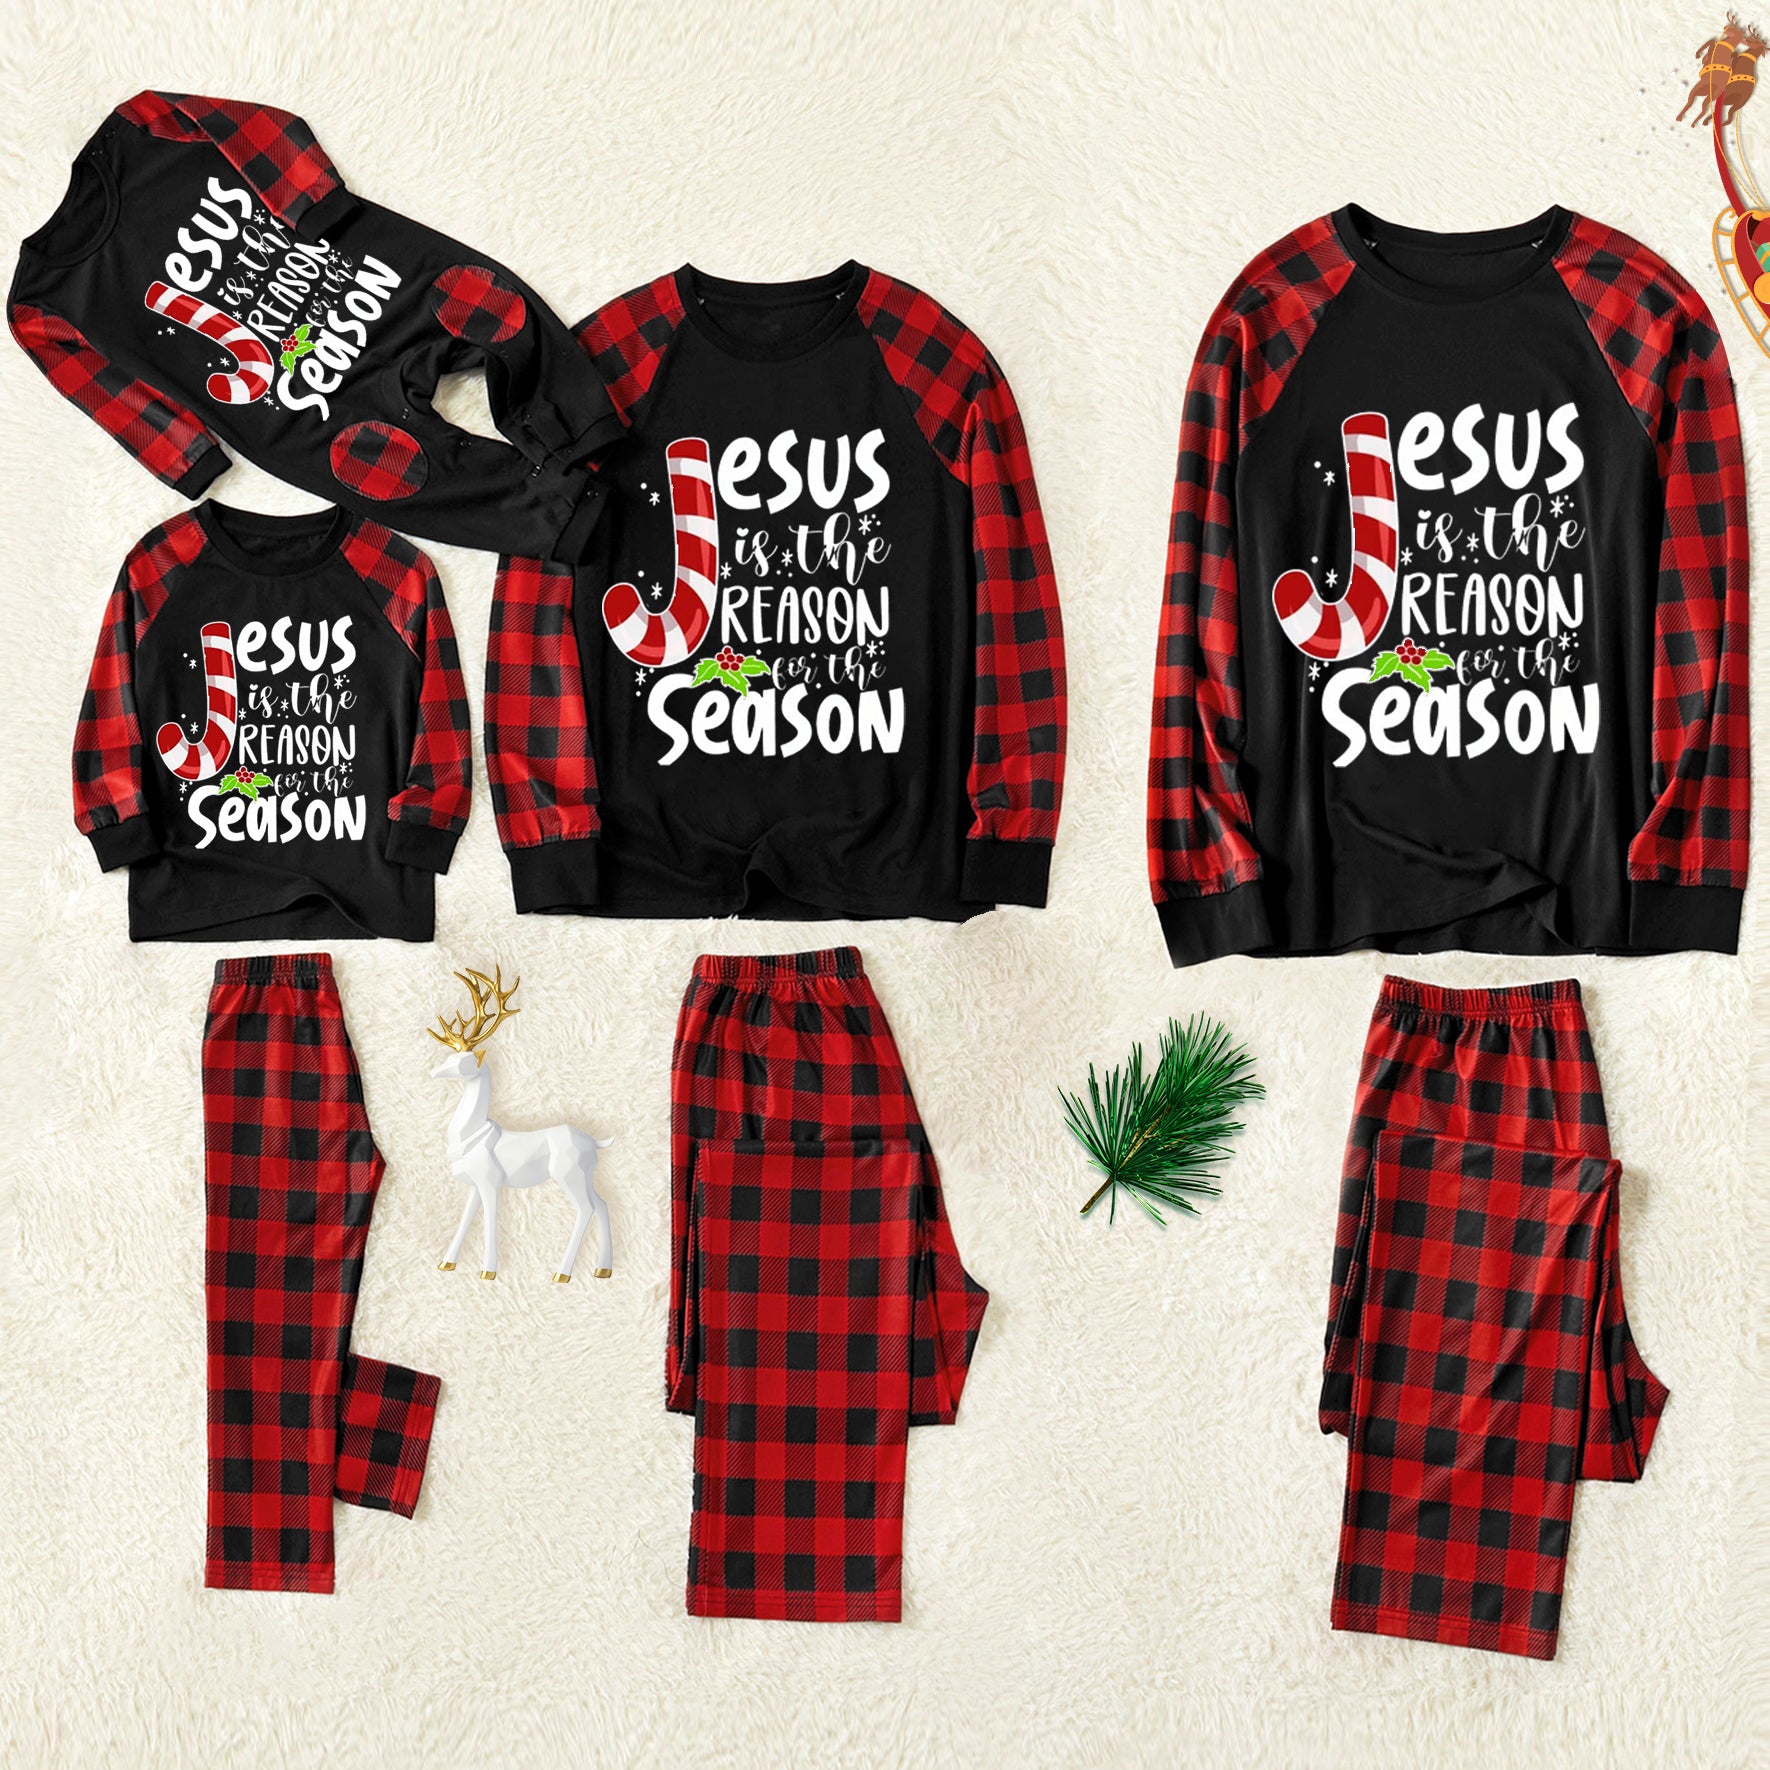 Christmas "Jesus is the Reason of the Season" Letter Print Patterned Contrast Black top and Black & Red Plaid Pants Family Matching Pajamas Set With Dog Bandana